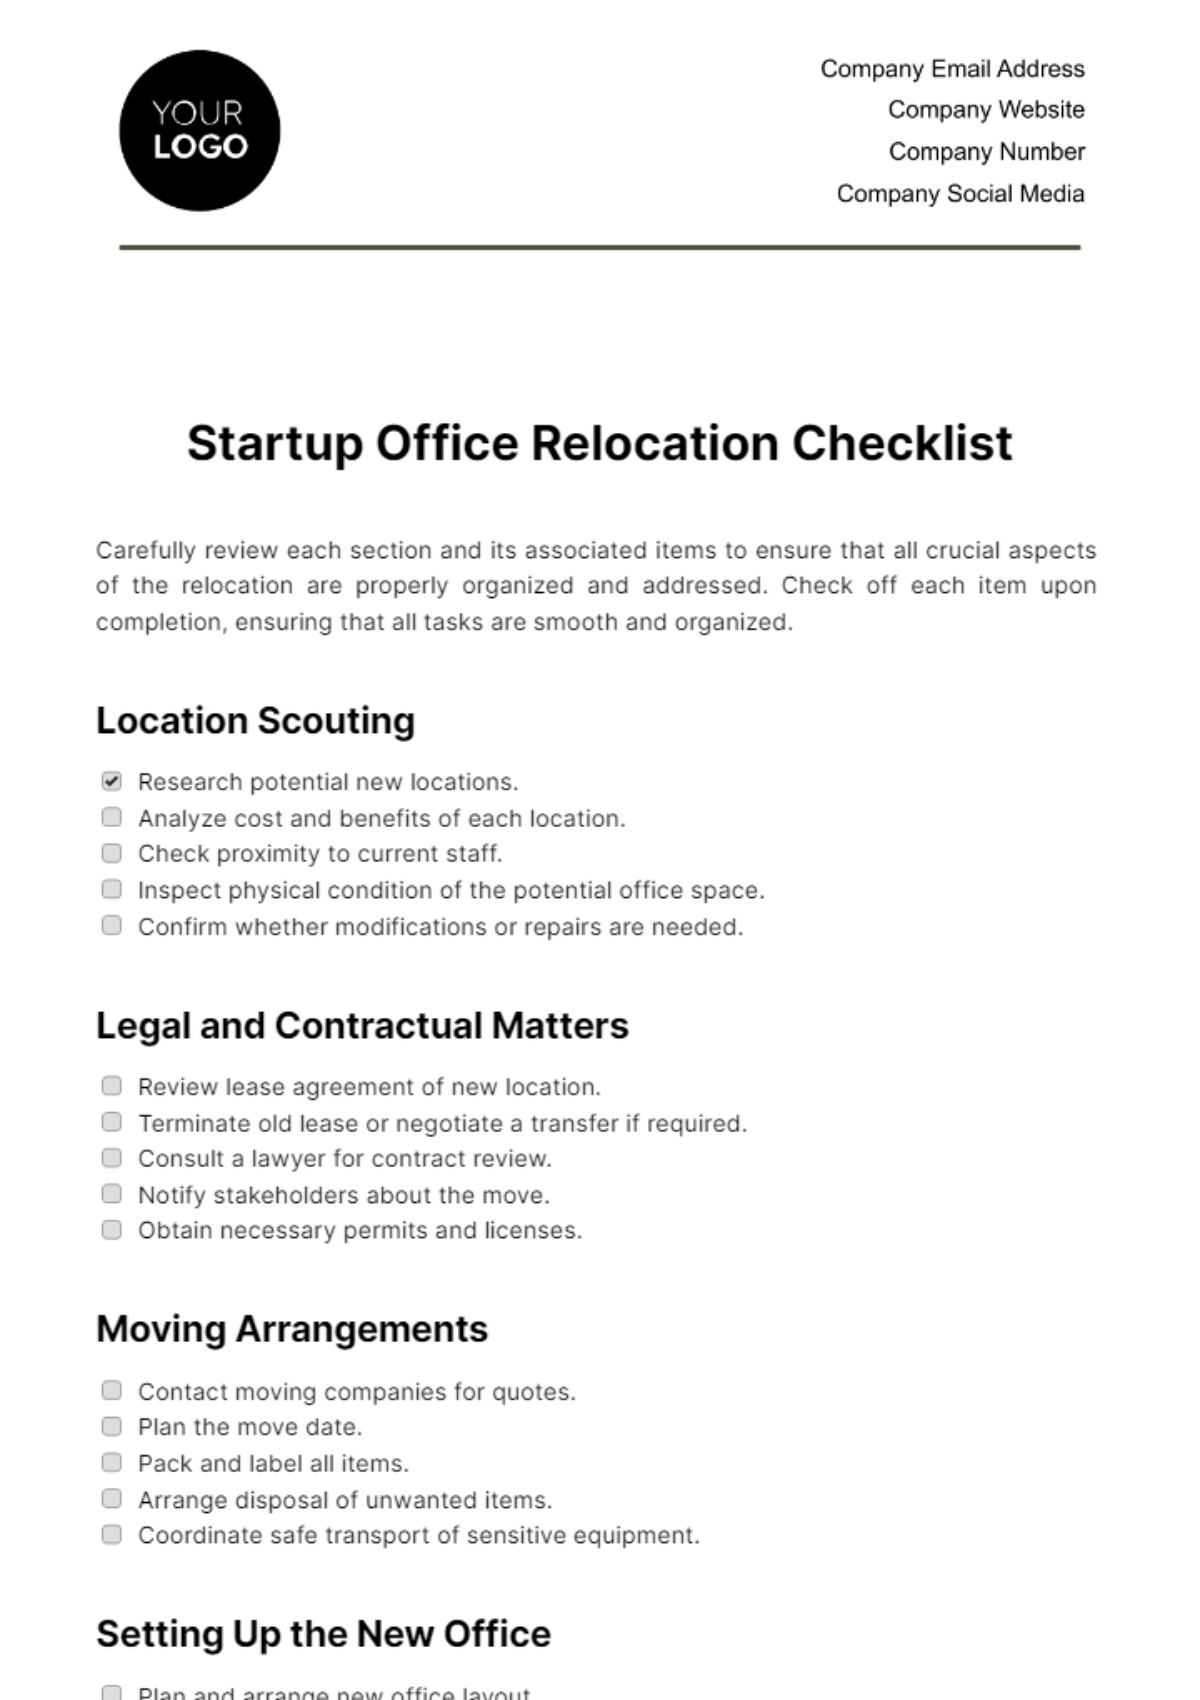 Startup Office Relocation Checklist Template